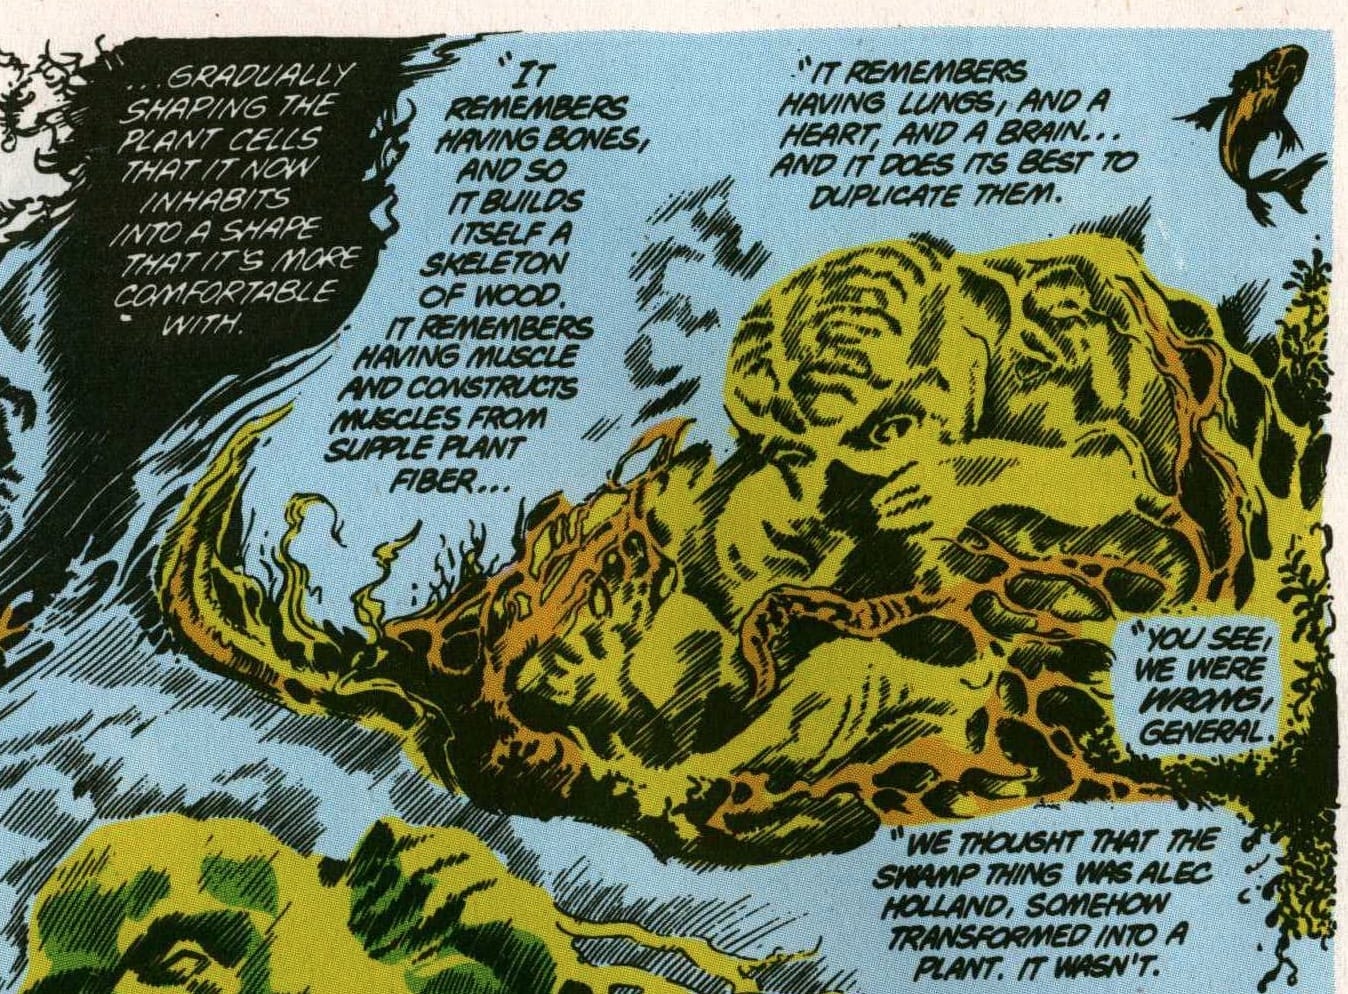 Uncovering the Buddhist lessons in Alan Moore's "Swamp Thing" comics |  Lion's Roar